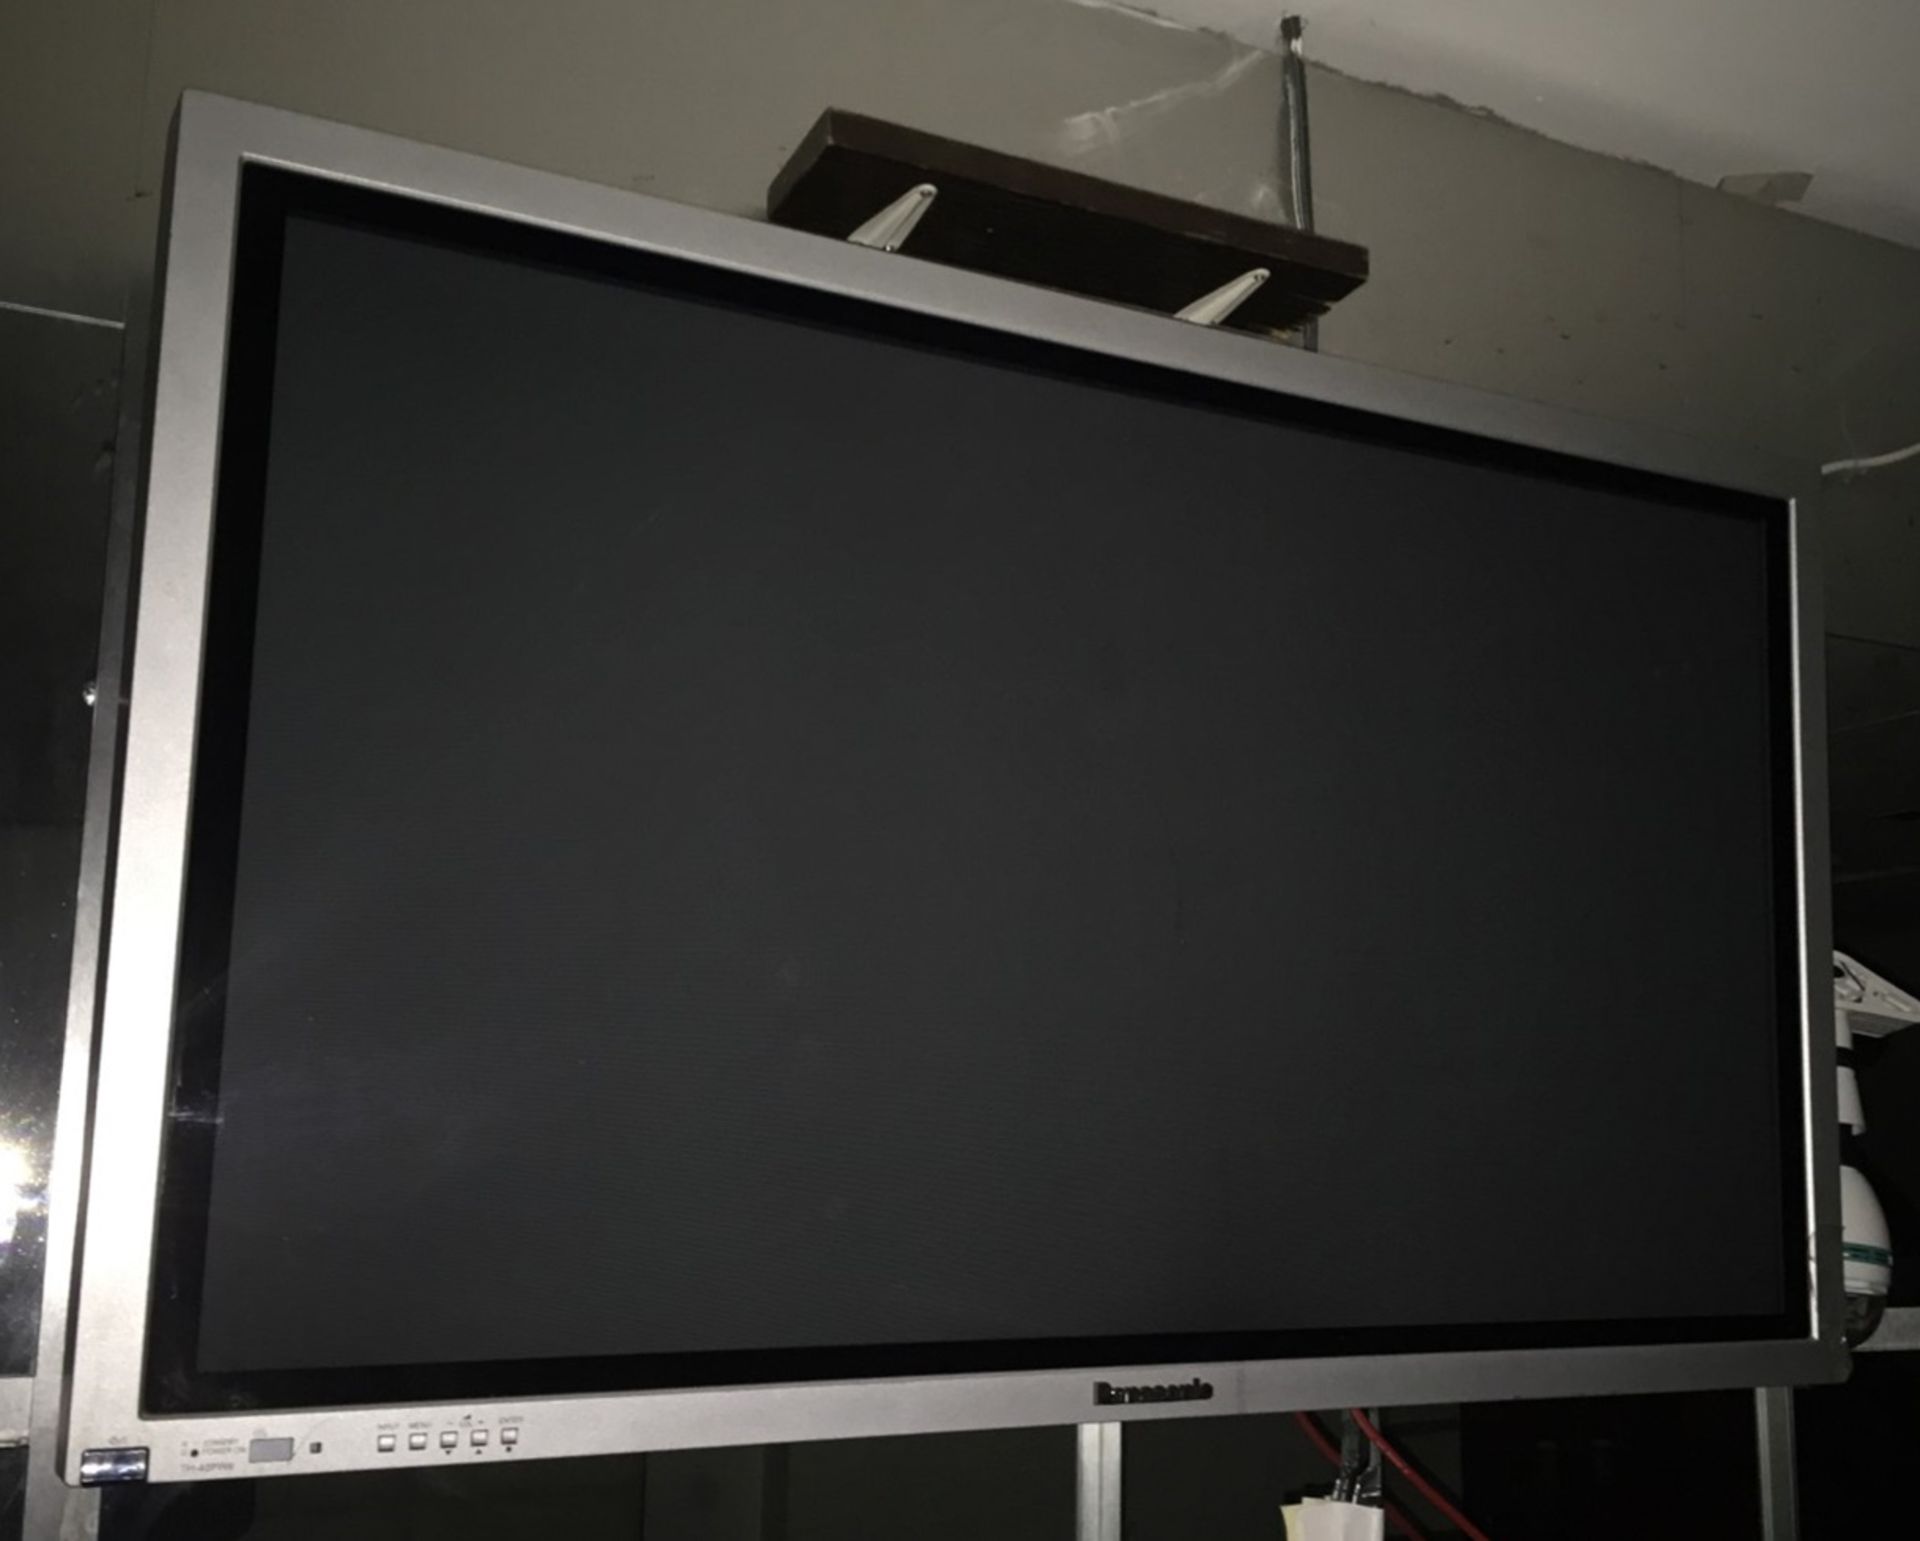 1 x Panasonic Flat Screen Television With Wall Bracket - Large Size - CL188 - Ref B38 - Location: